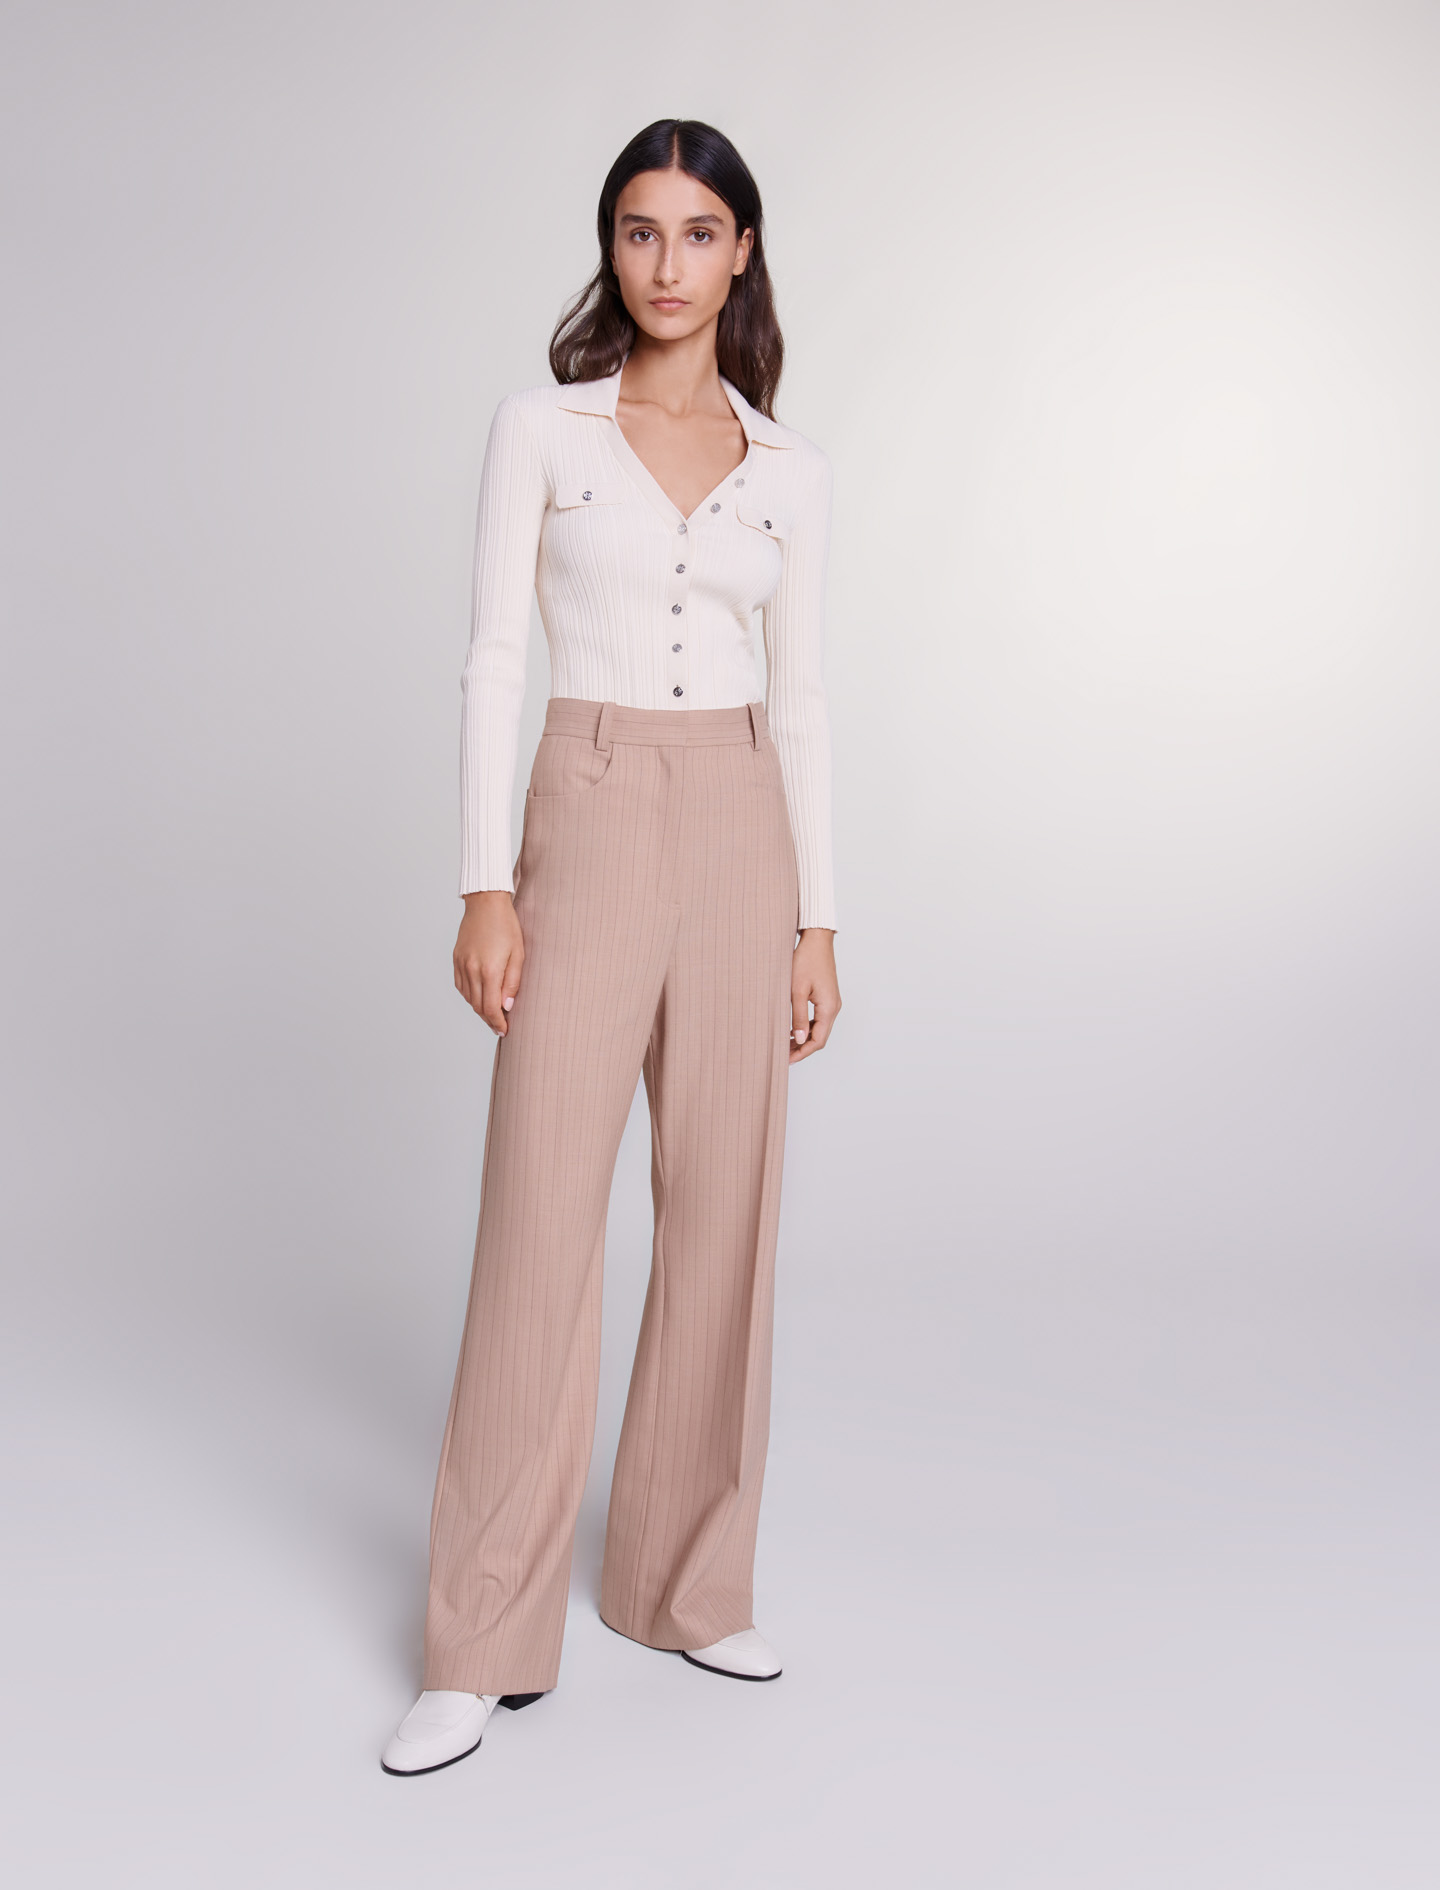 Maje Woman's wool, High-waisted trousers for Spring/Summer, in color Beige / Beige